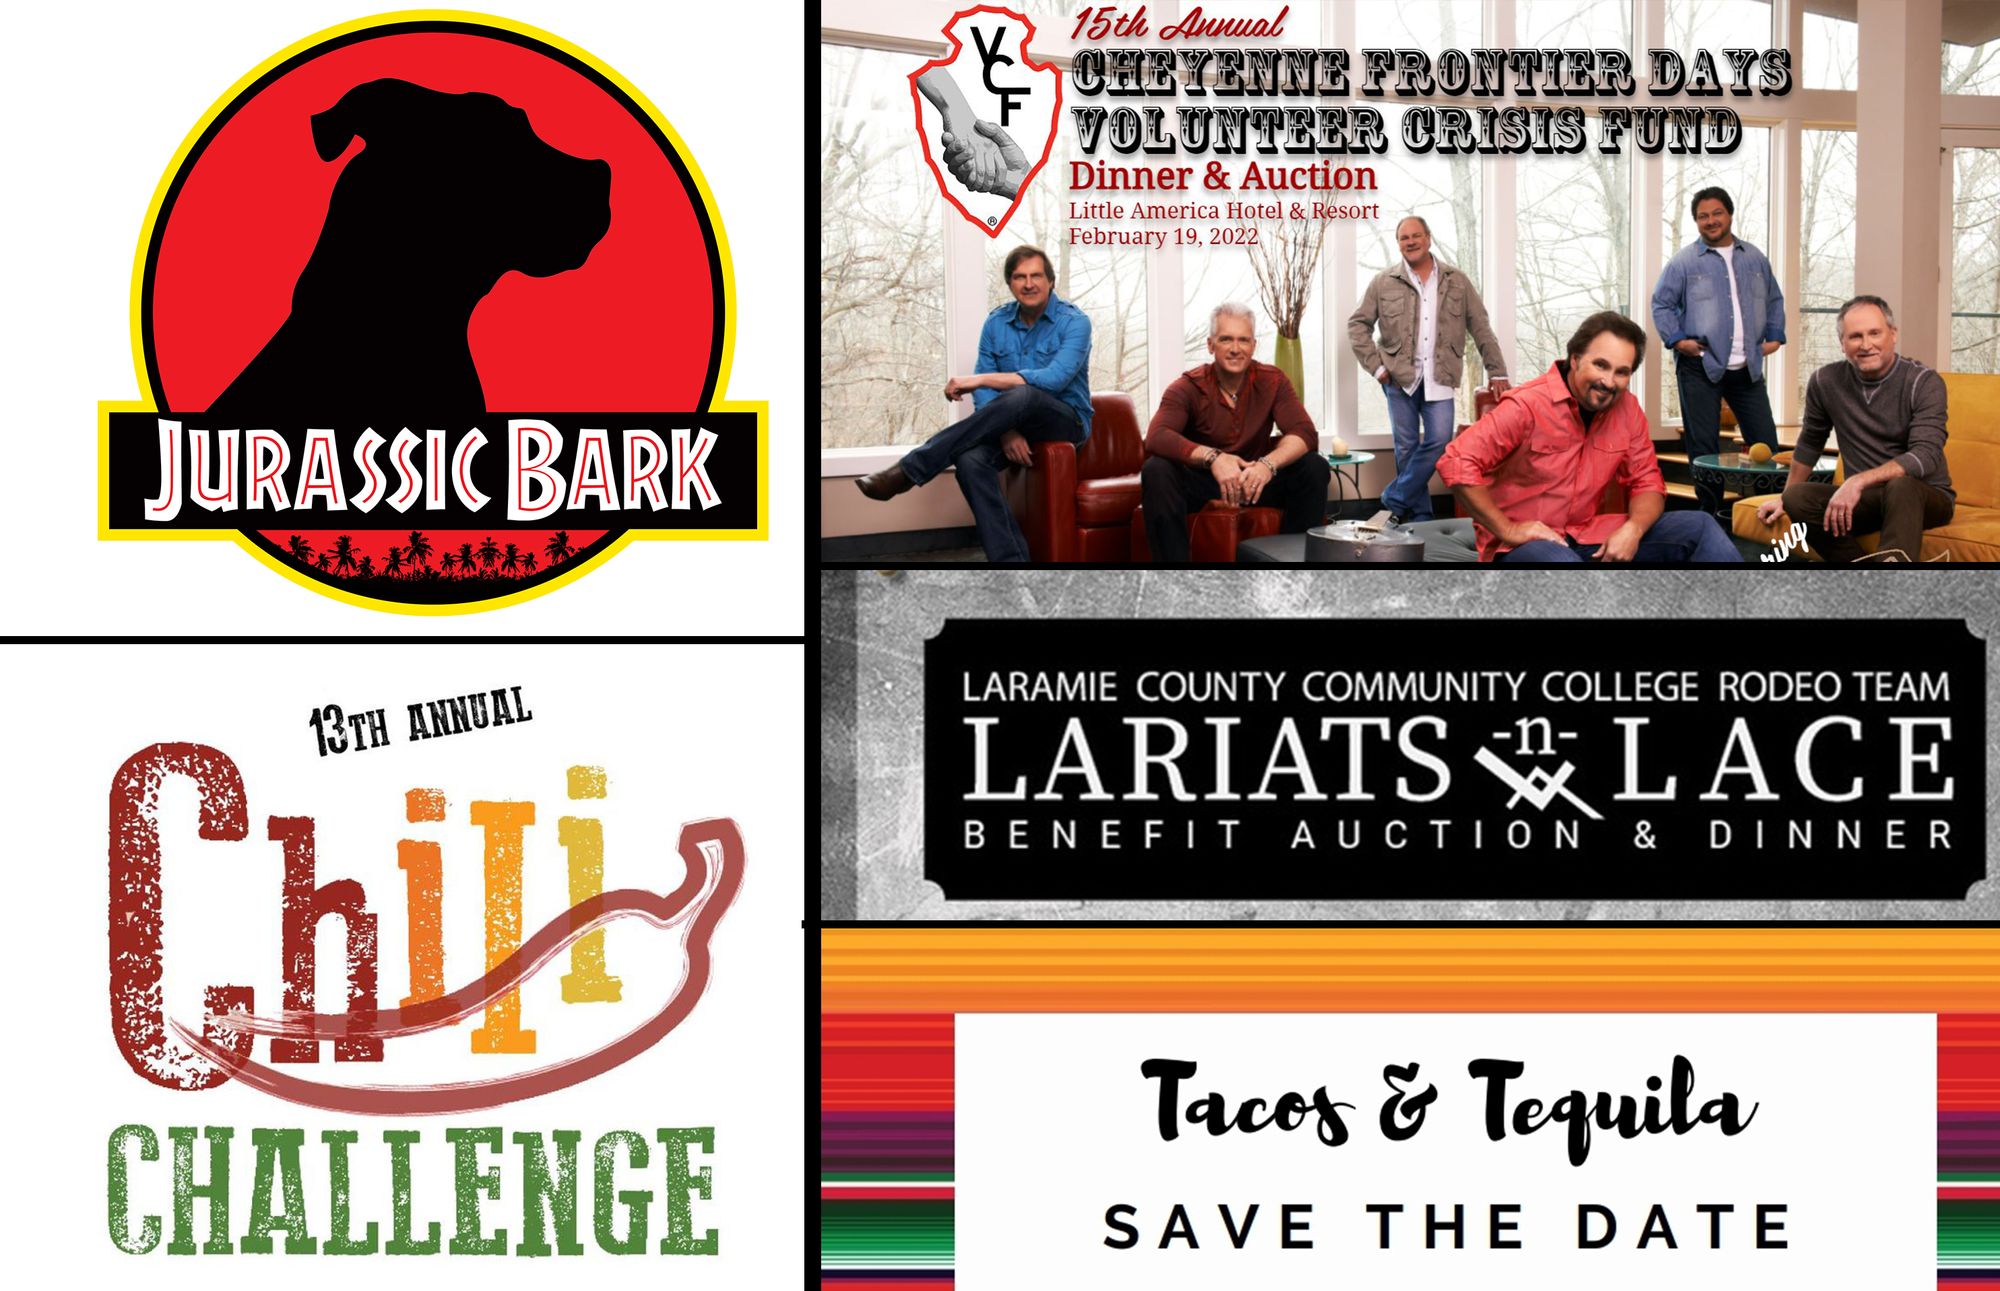 Don't Miss These 5 Fabulous Upcoming Community Events - All For Great Causes!